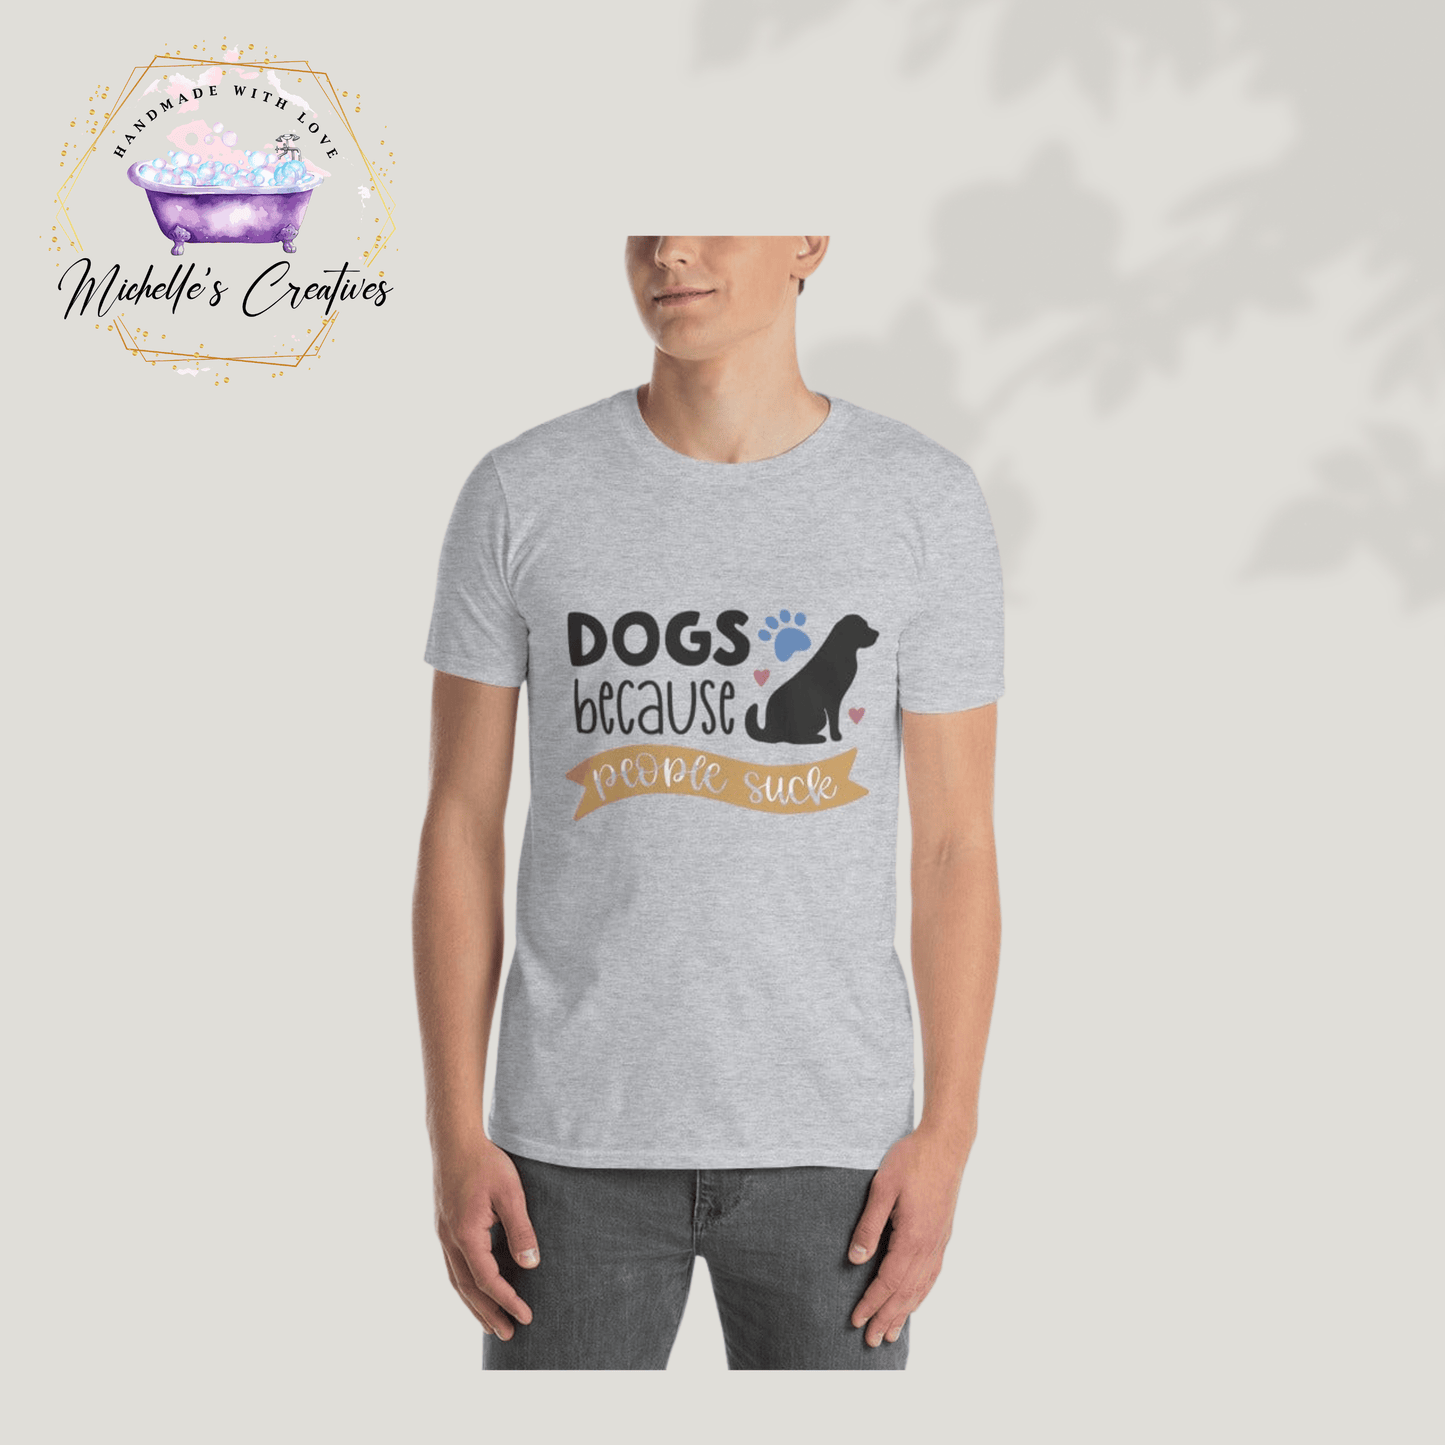 Michelle's Creatives Sport Grey / S Love Dogs Because People Suck Short-Sleeve Unisex T-Shirt 1421957_503